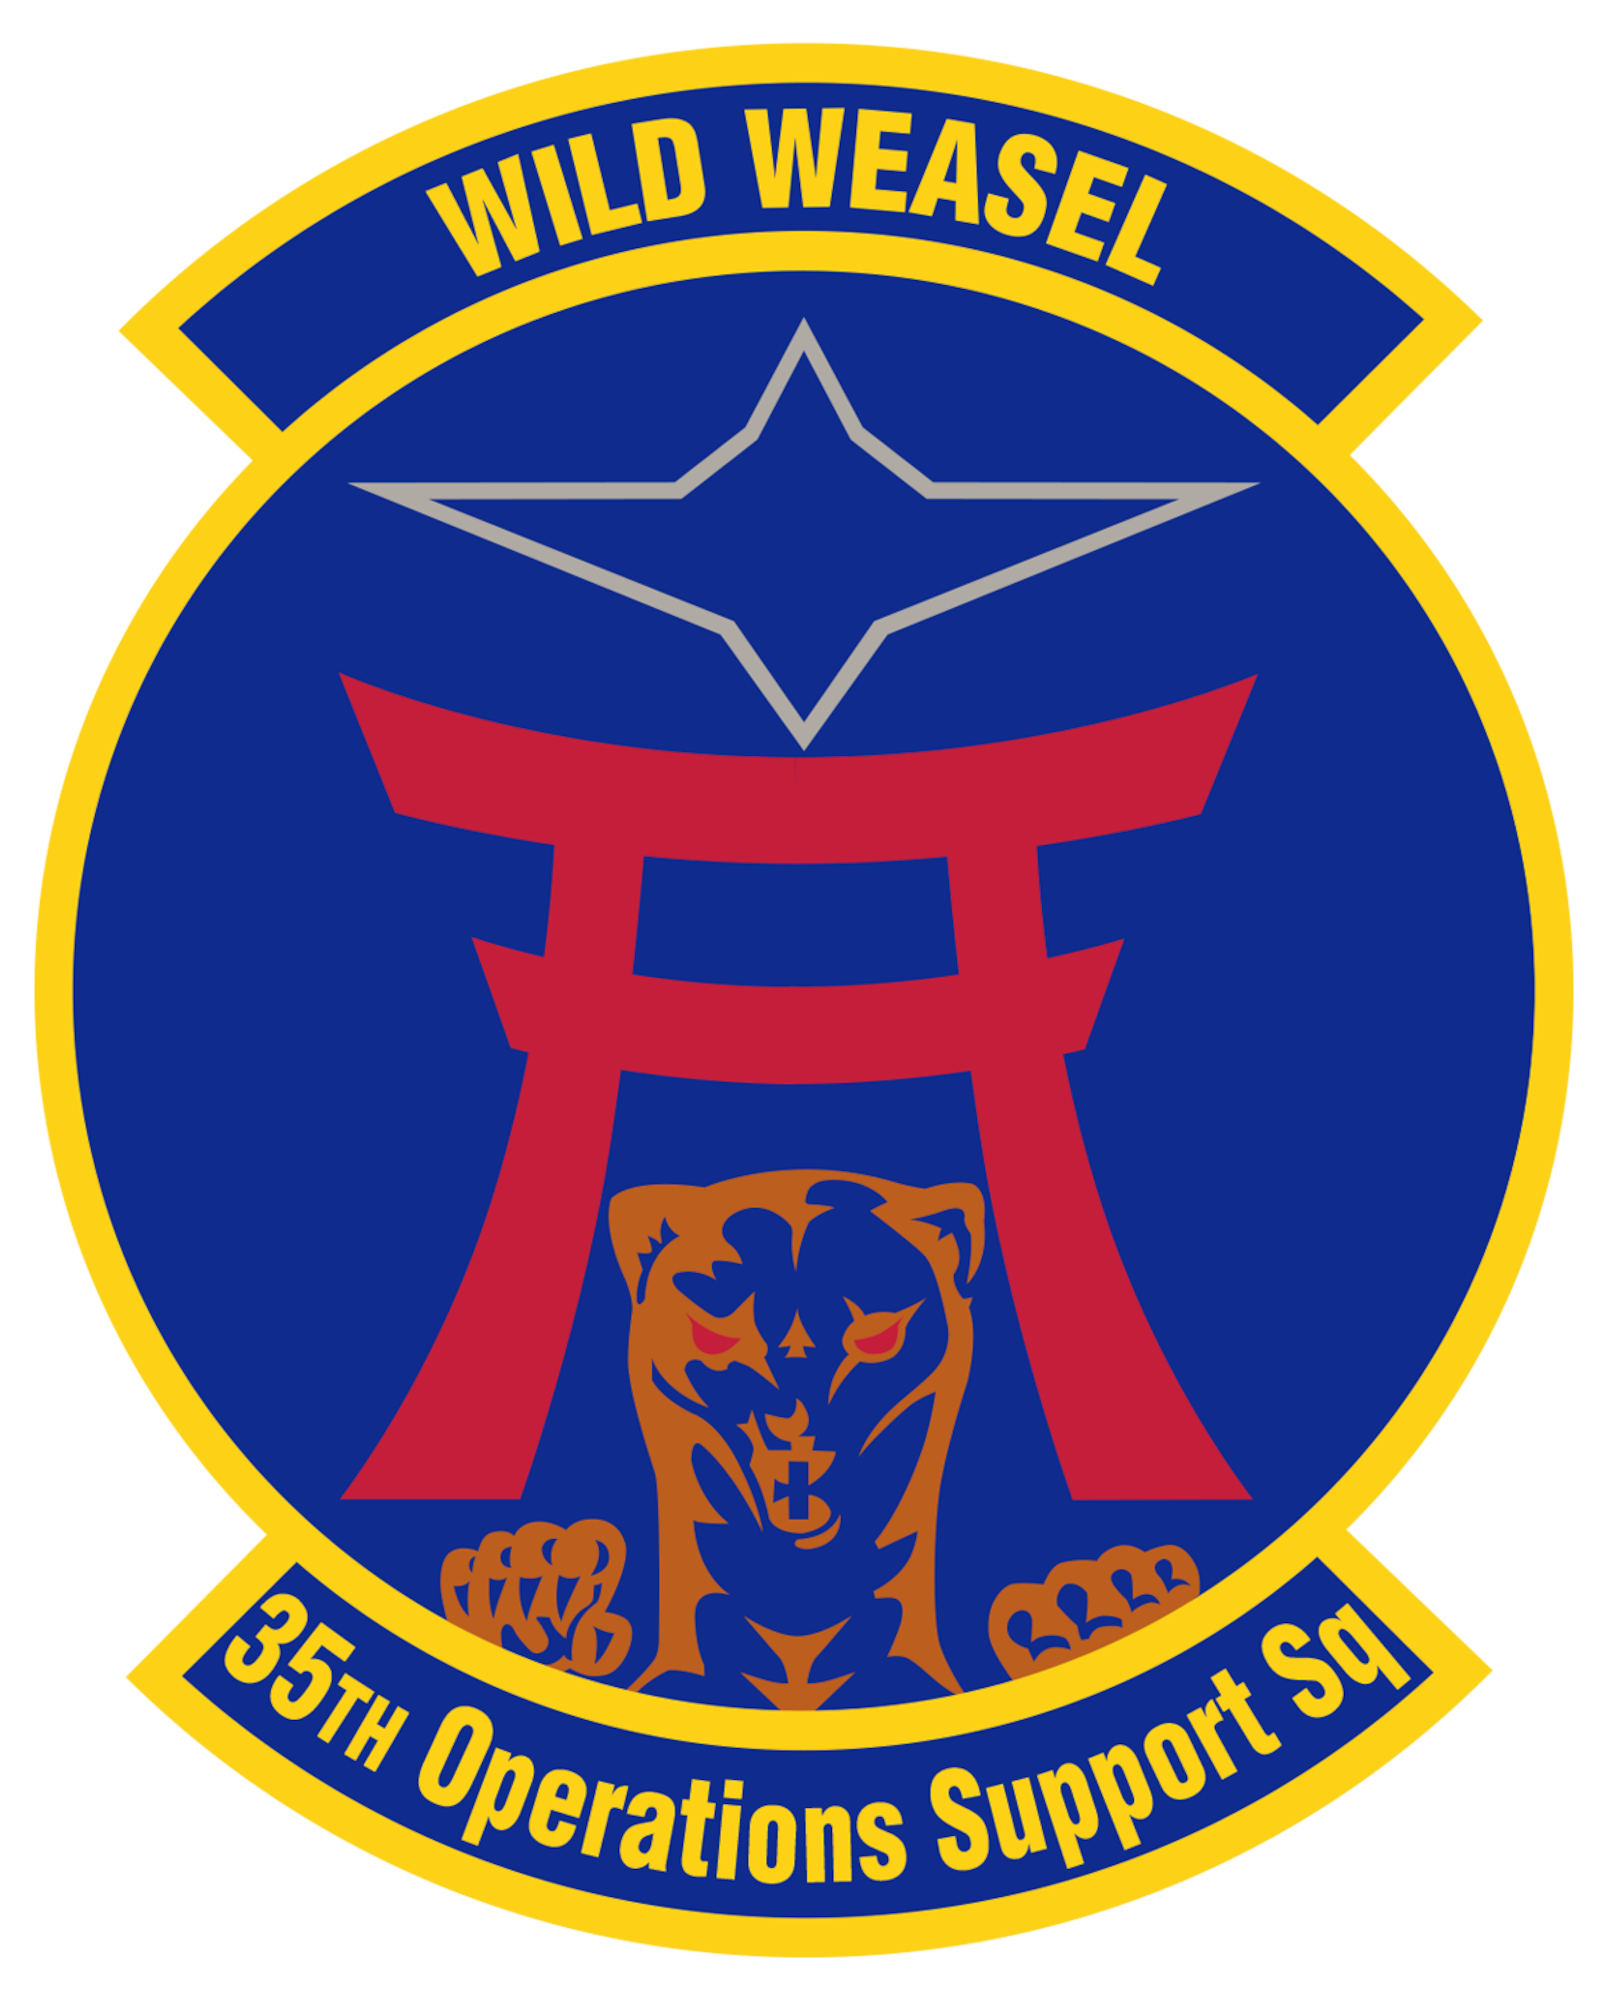 35th Operations Support Squadron